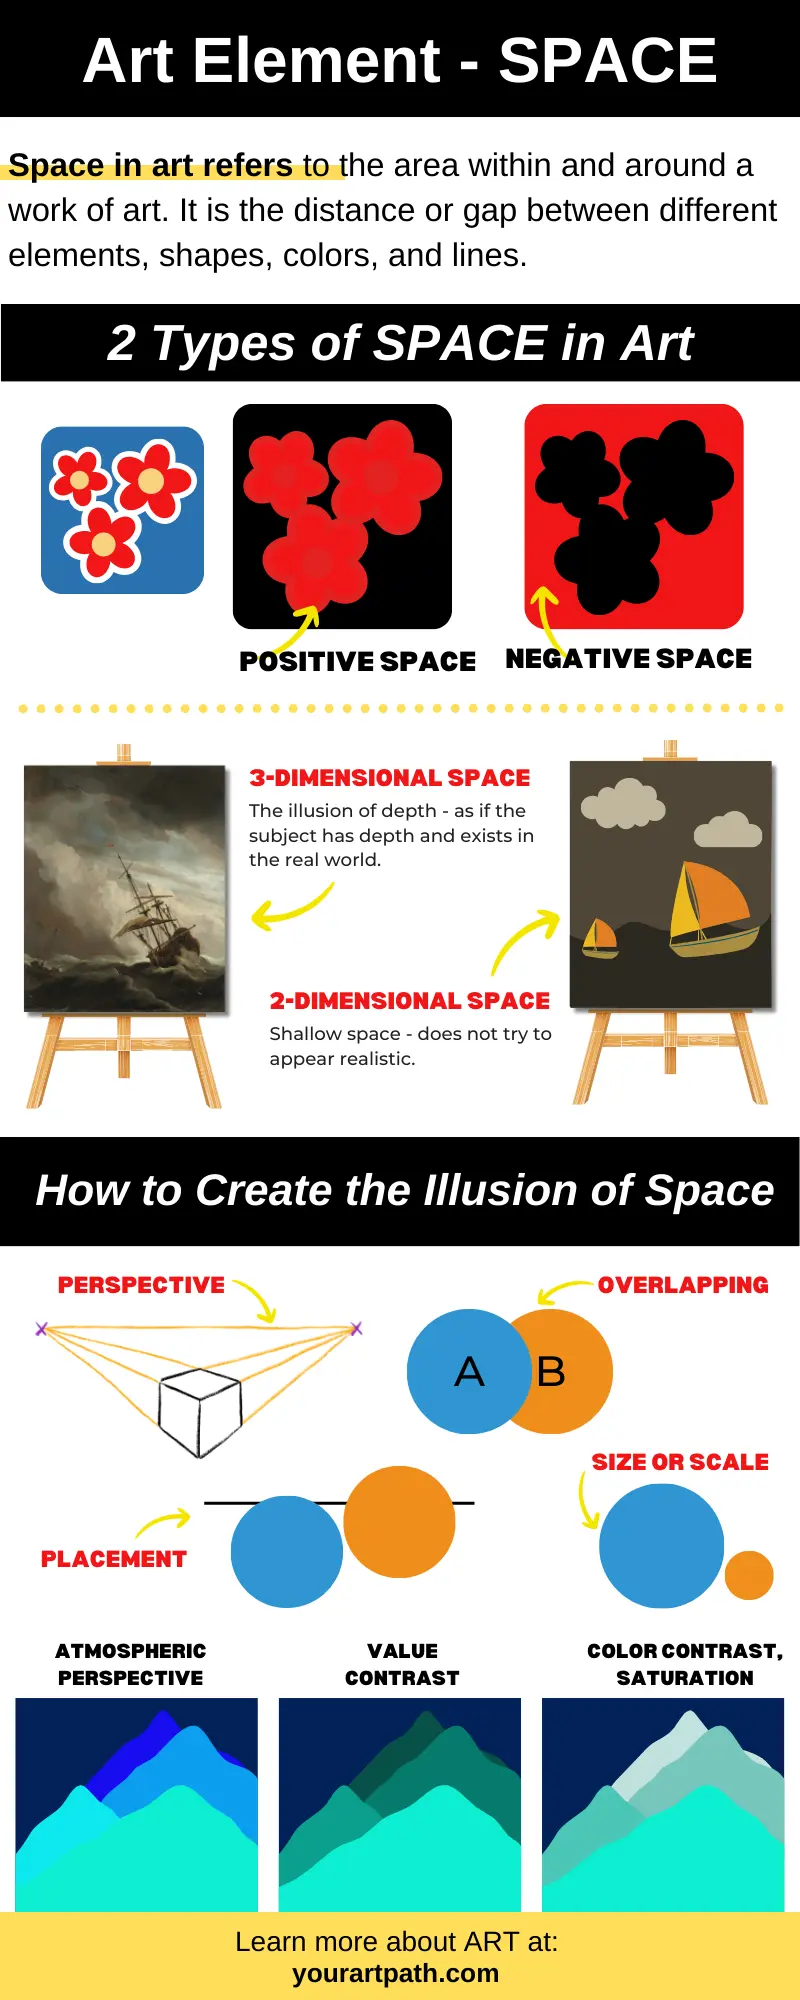 Space in art definition, examples, 2 types positive and negative, 2D and 3D space, how to achieve space